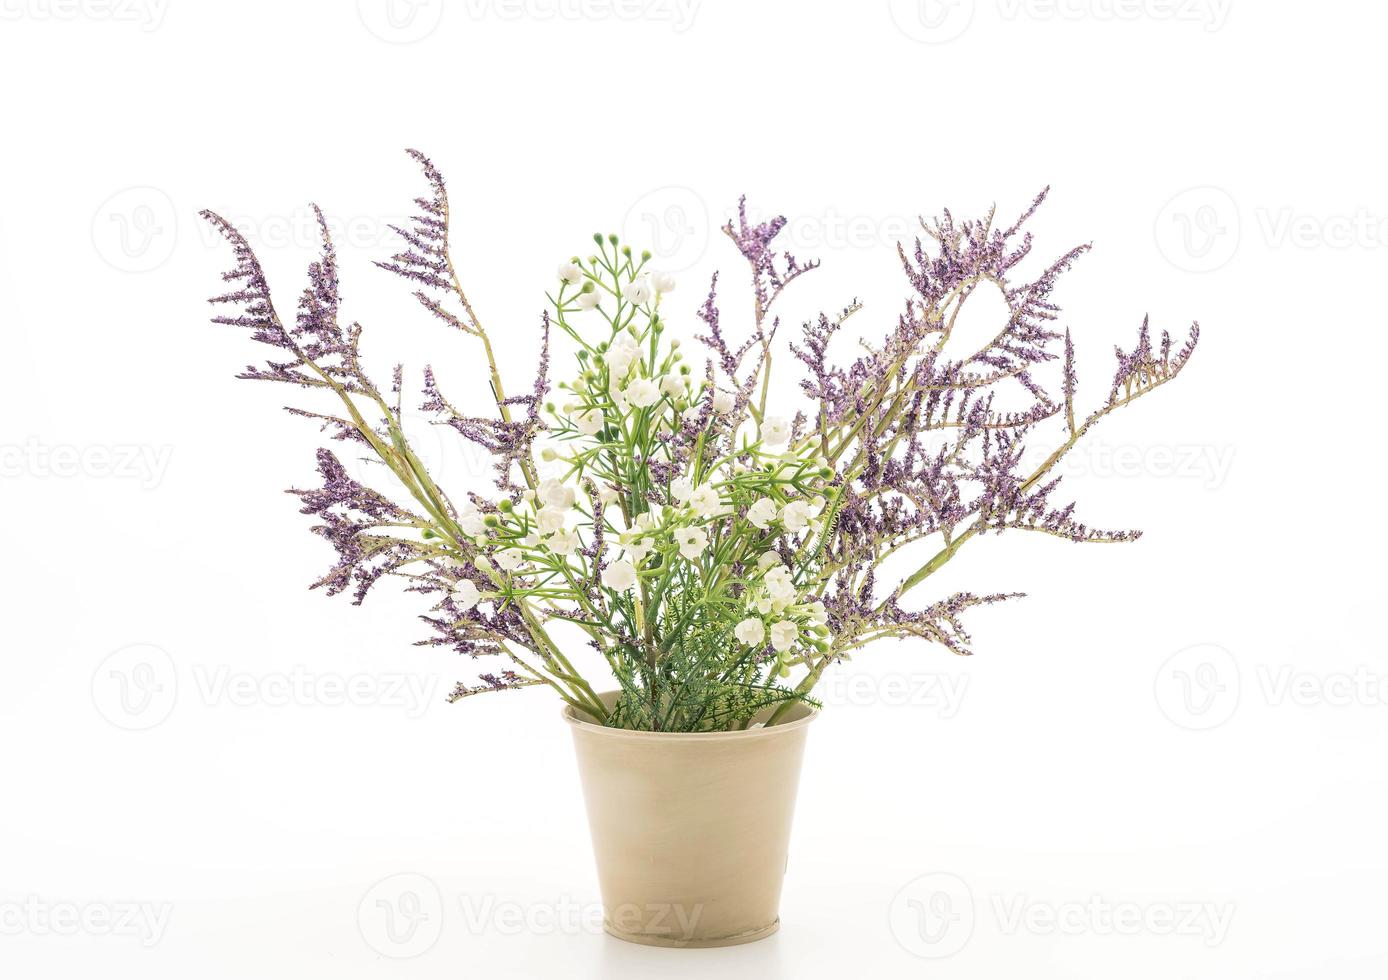 Statice and caspia flowers in a vase on white background photo